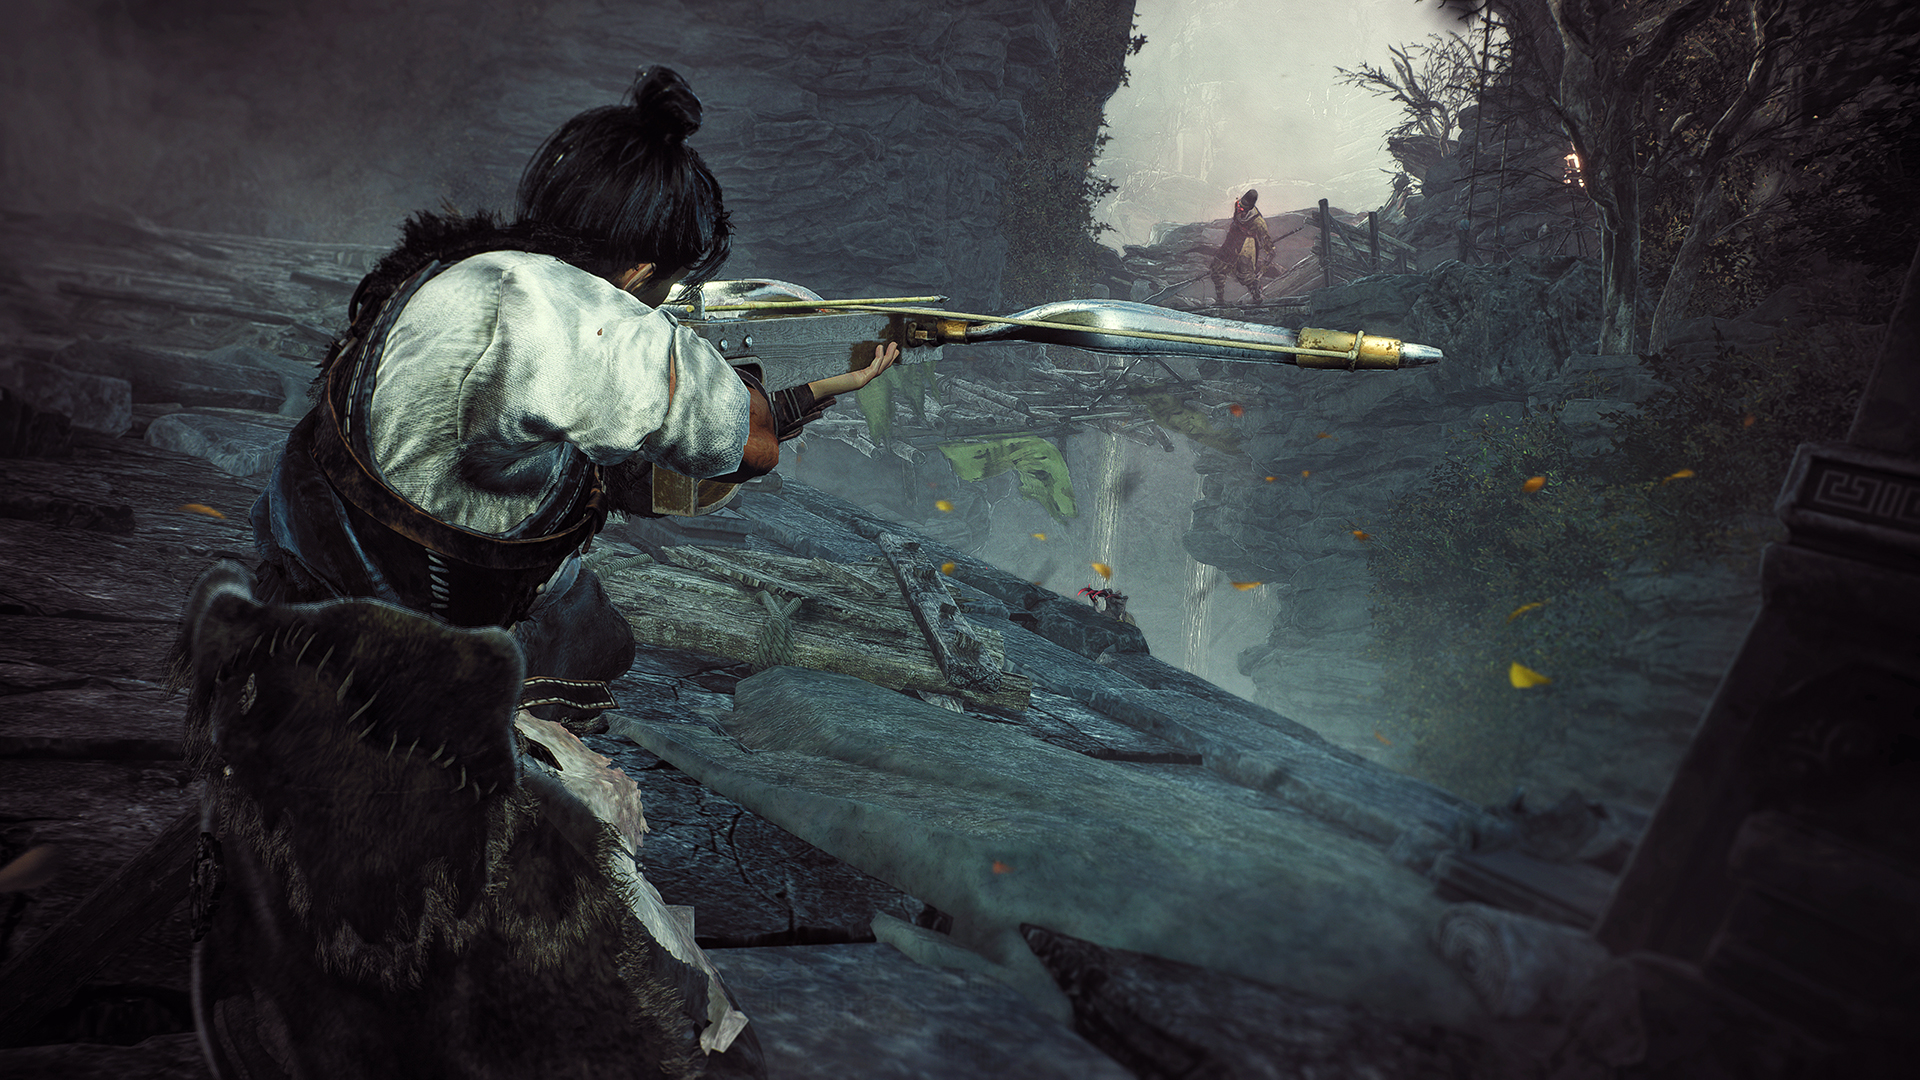 You'll have a variety of weapons available to you in Wo Long: Fallen Dynasty